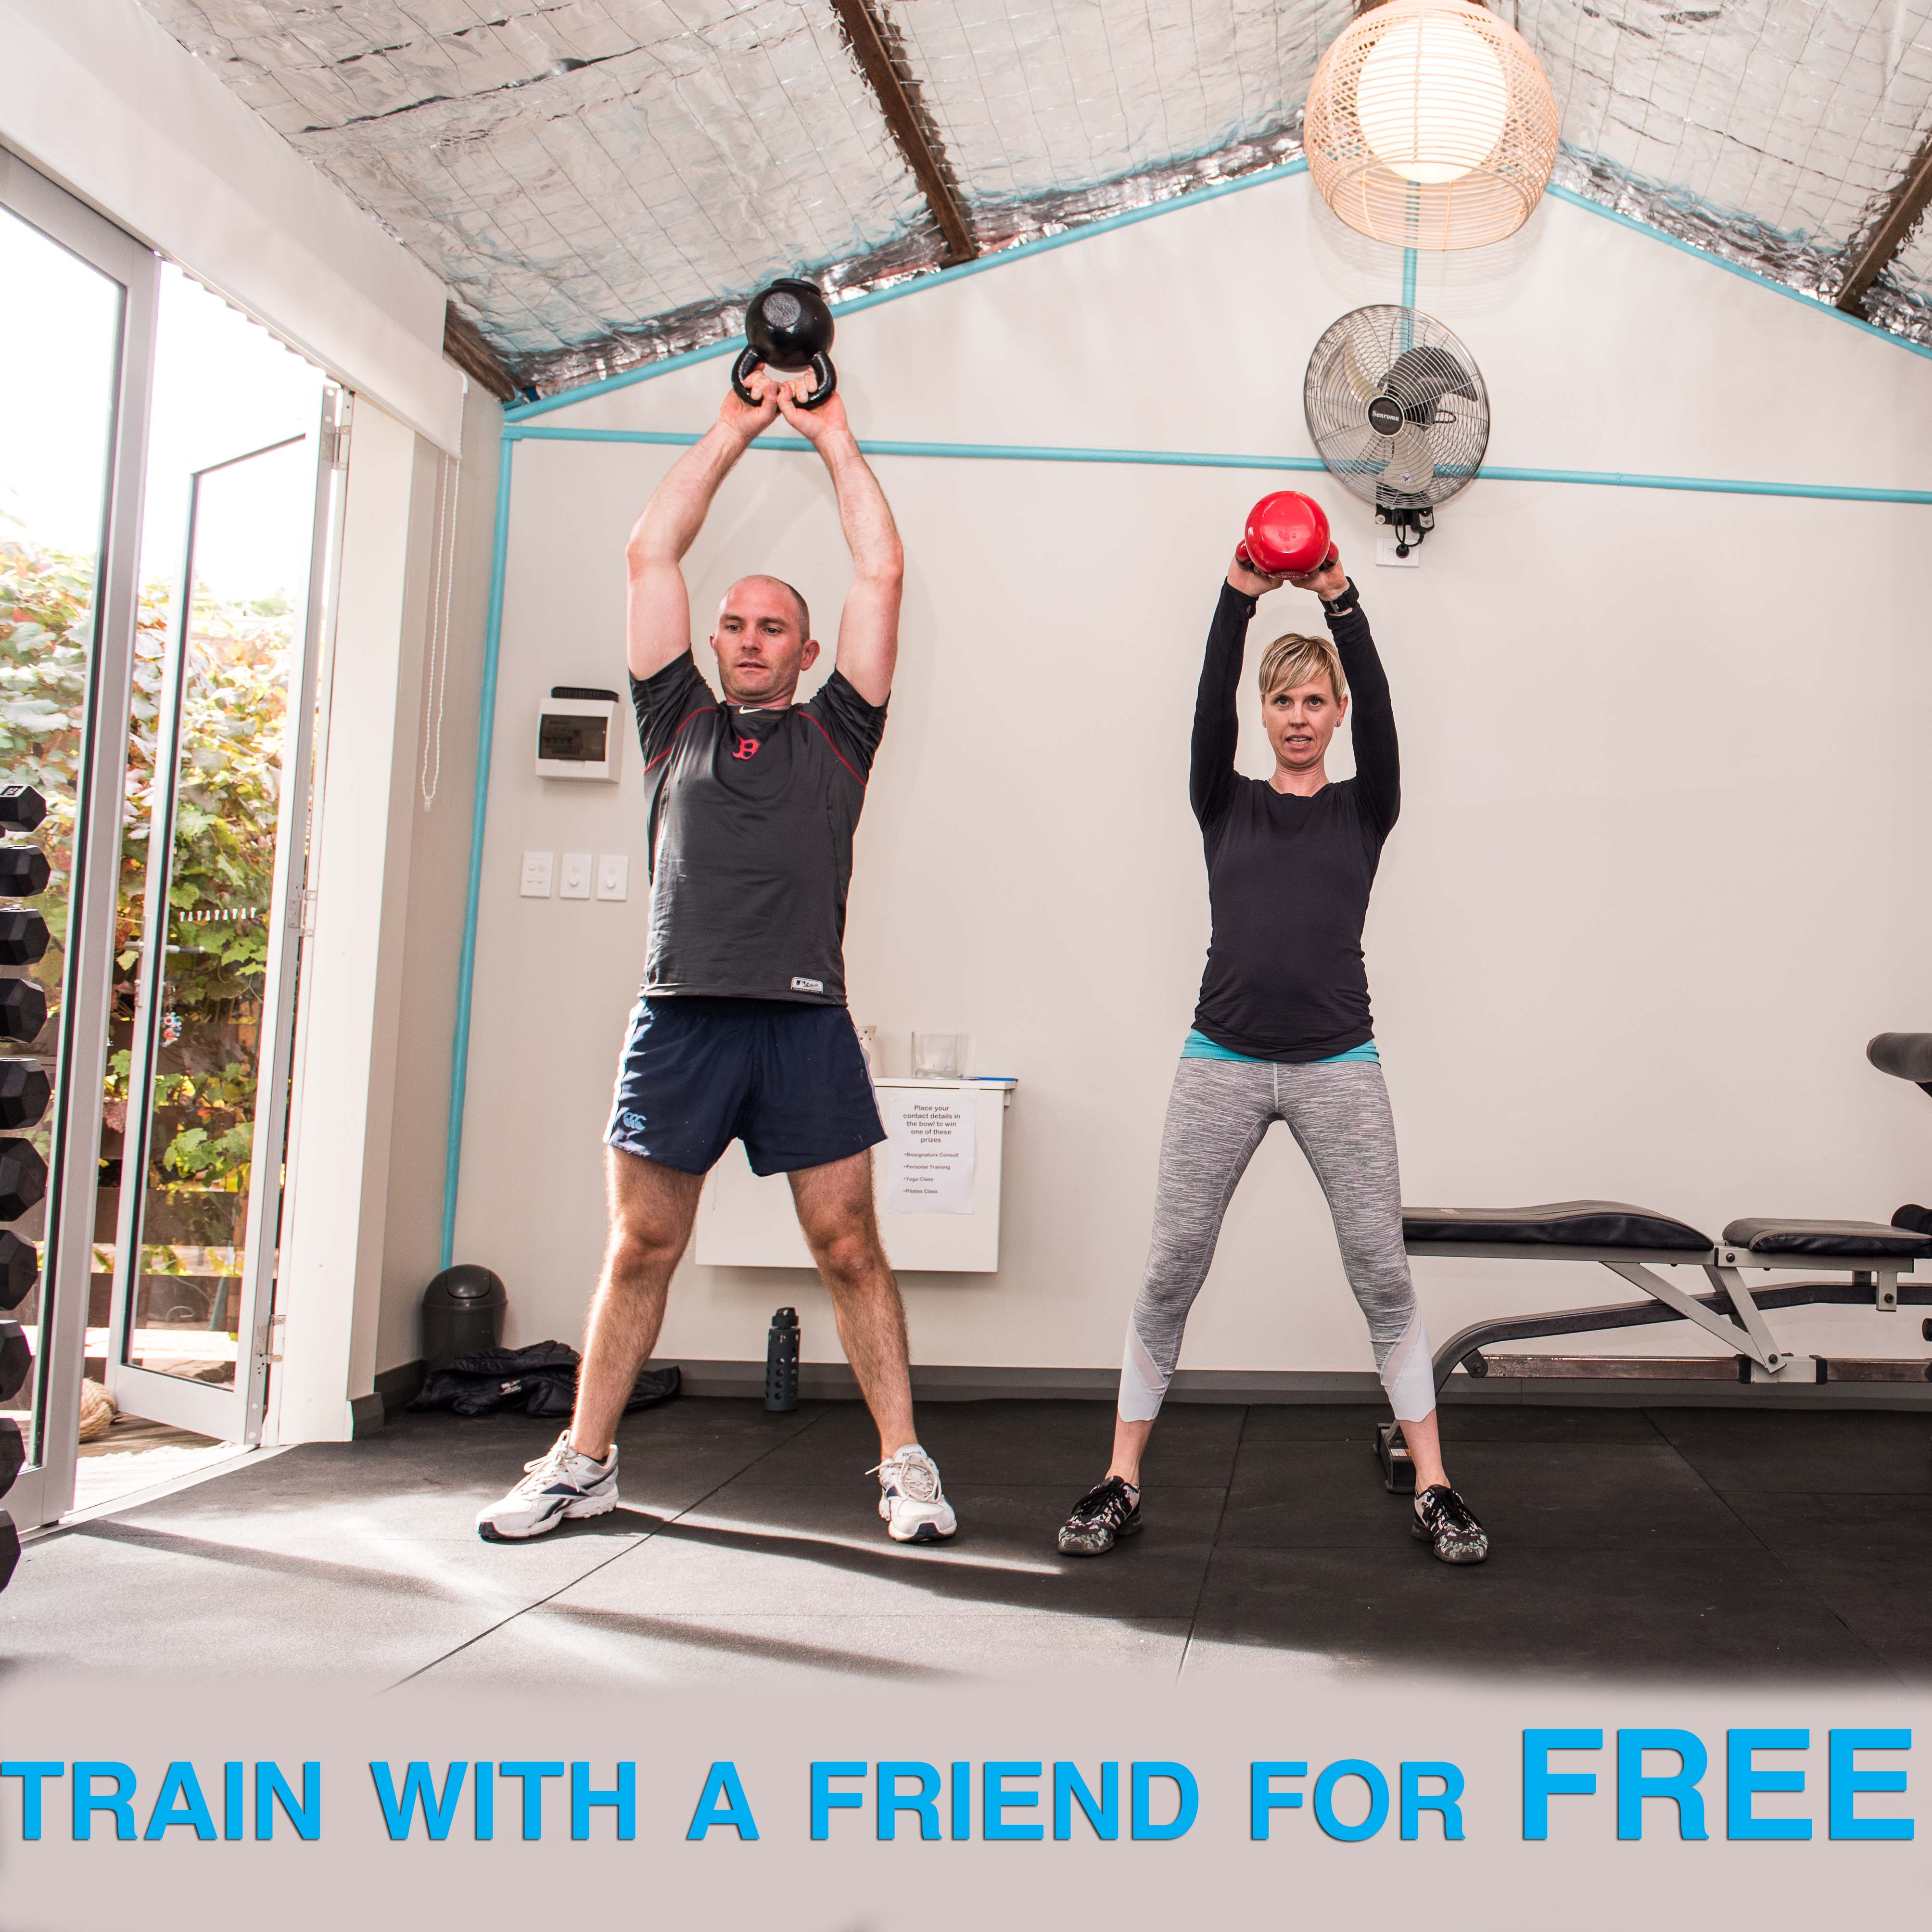 Find a Workout Buddy. Train with a friend for Free